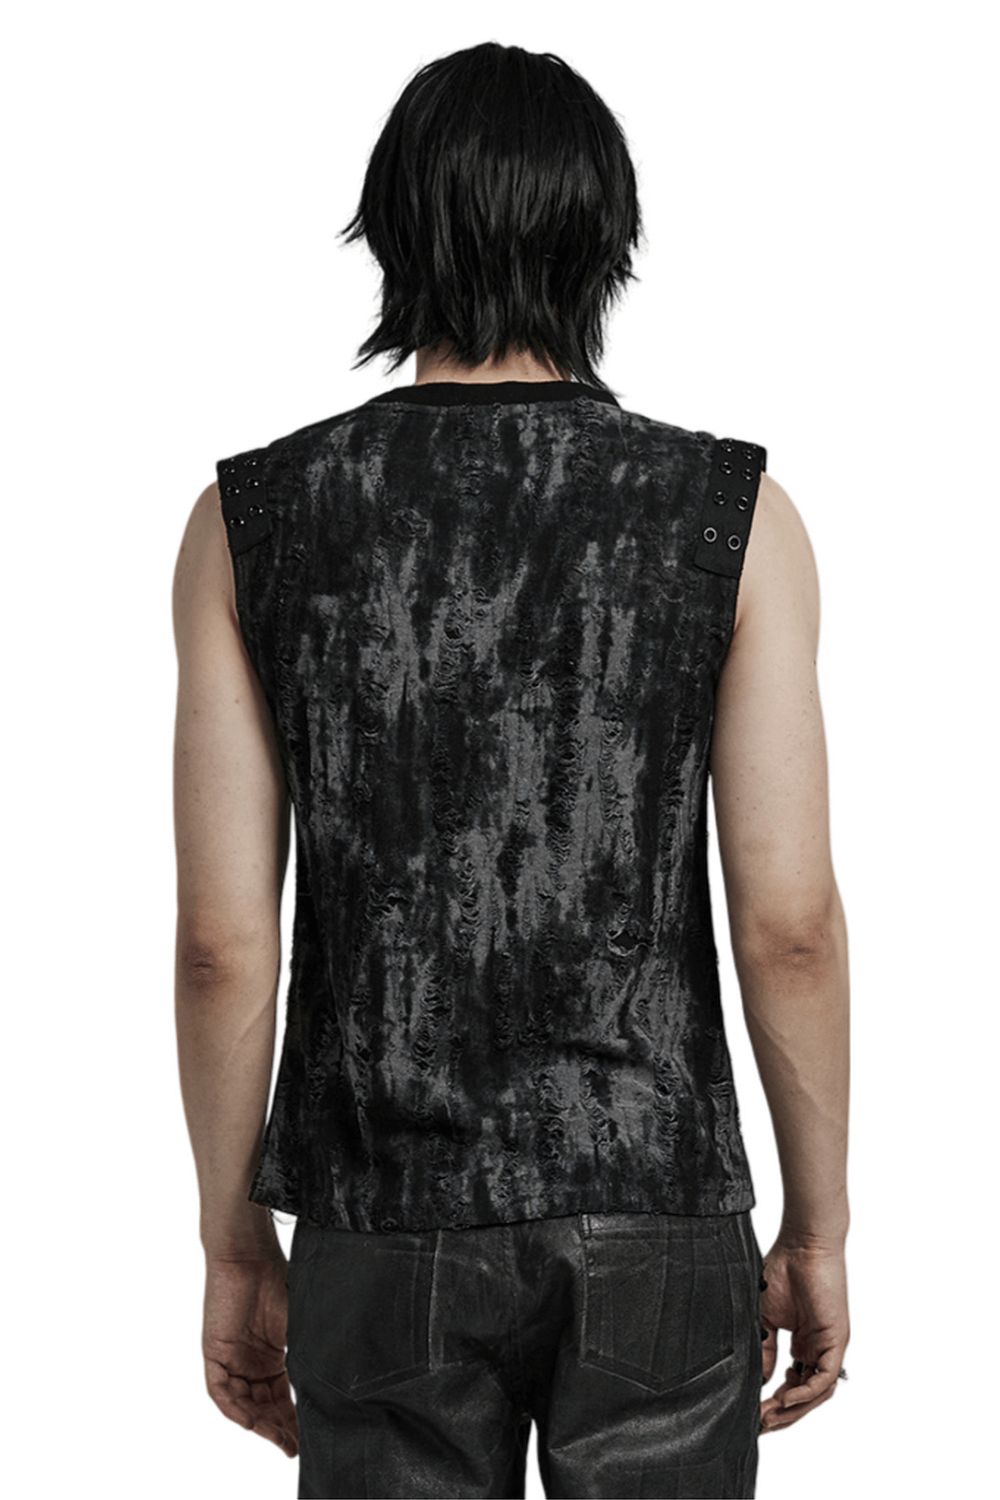 Gothic Tattered Fabric Tank Top with Eyelet Webbing